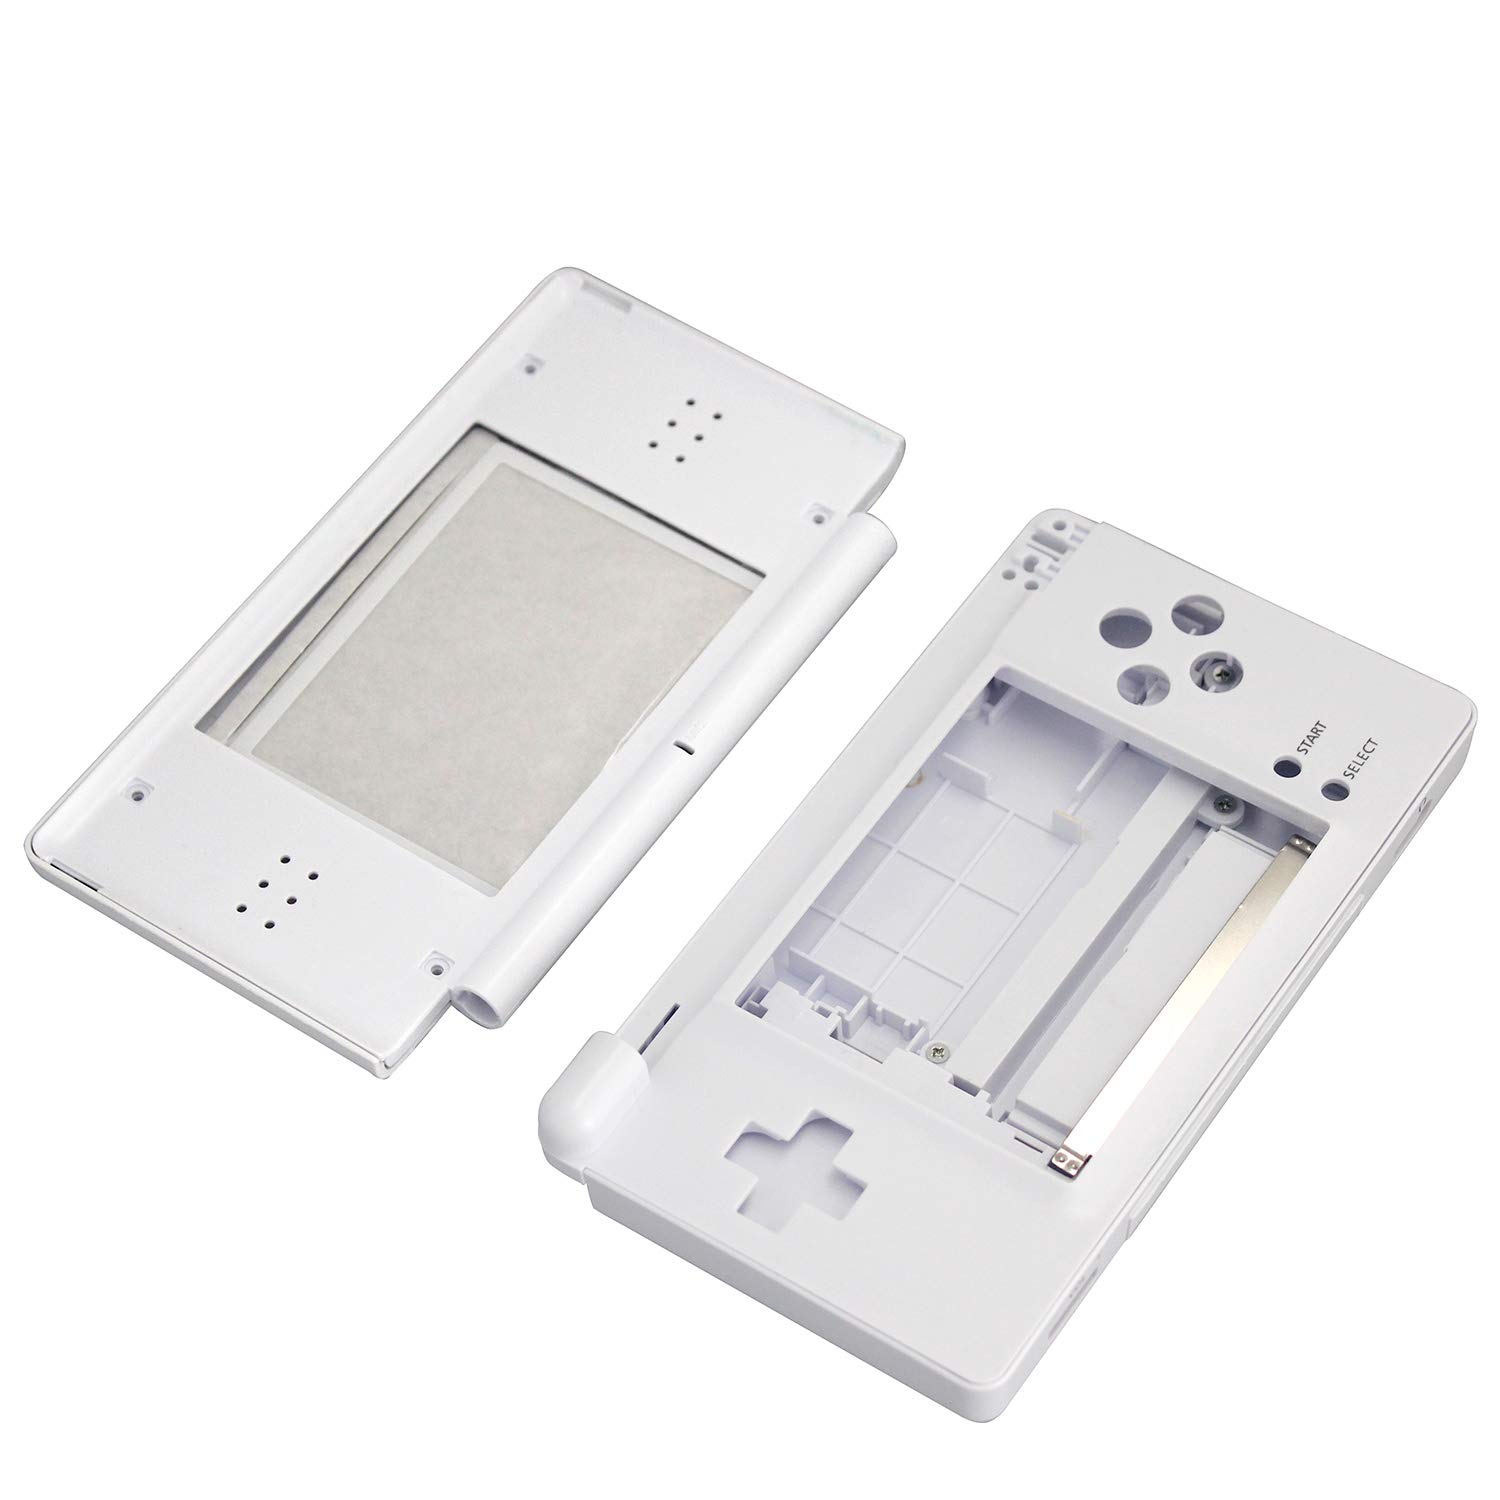 OSTENT Full Repair Parts Replacement Housing Shell Case Kit for Nintendo DS Lite NDSL Color White